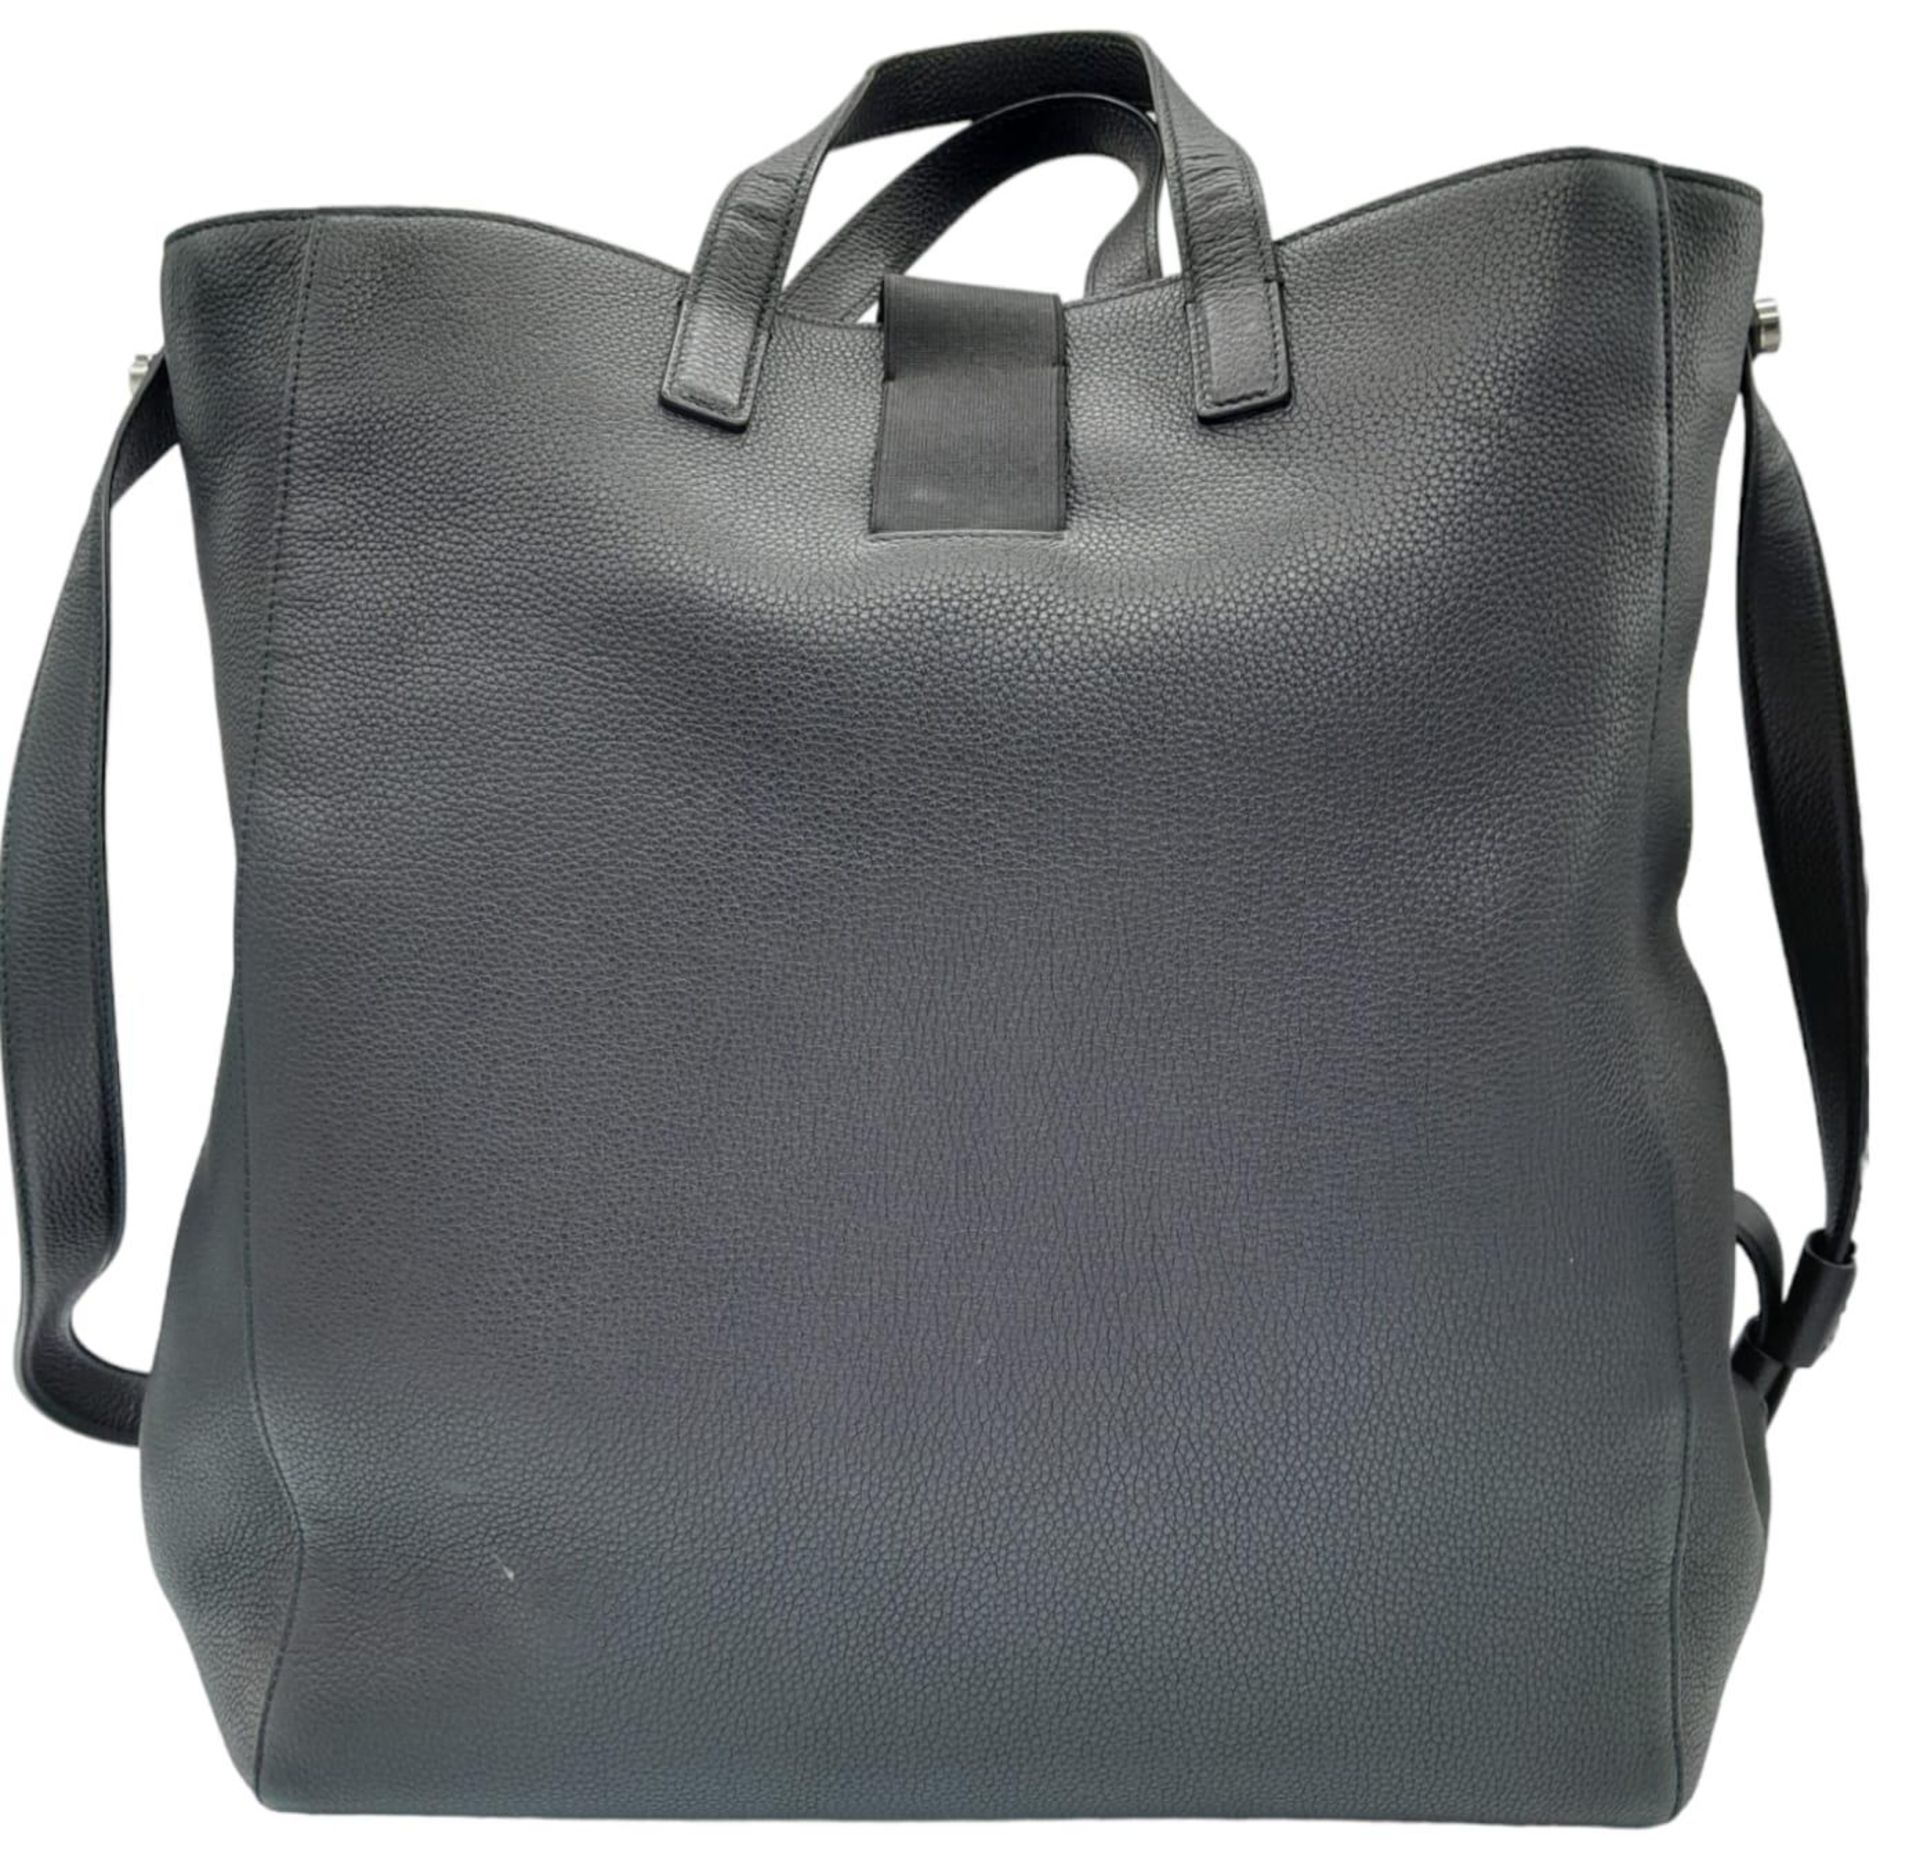 A Christopher Kane Black Tote Bag. Leather exterior with silver-toned hardware, two top handles, - Image 3 of 7